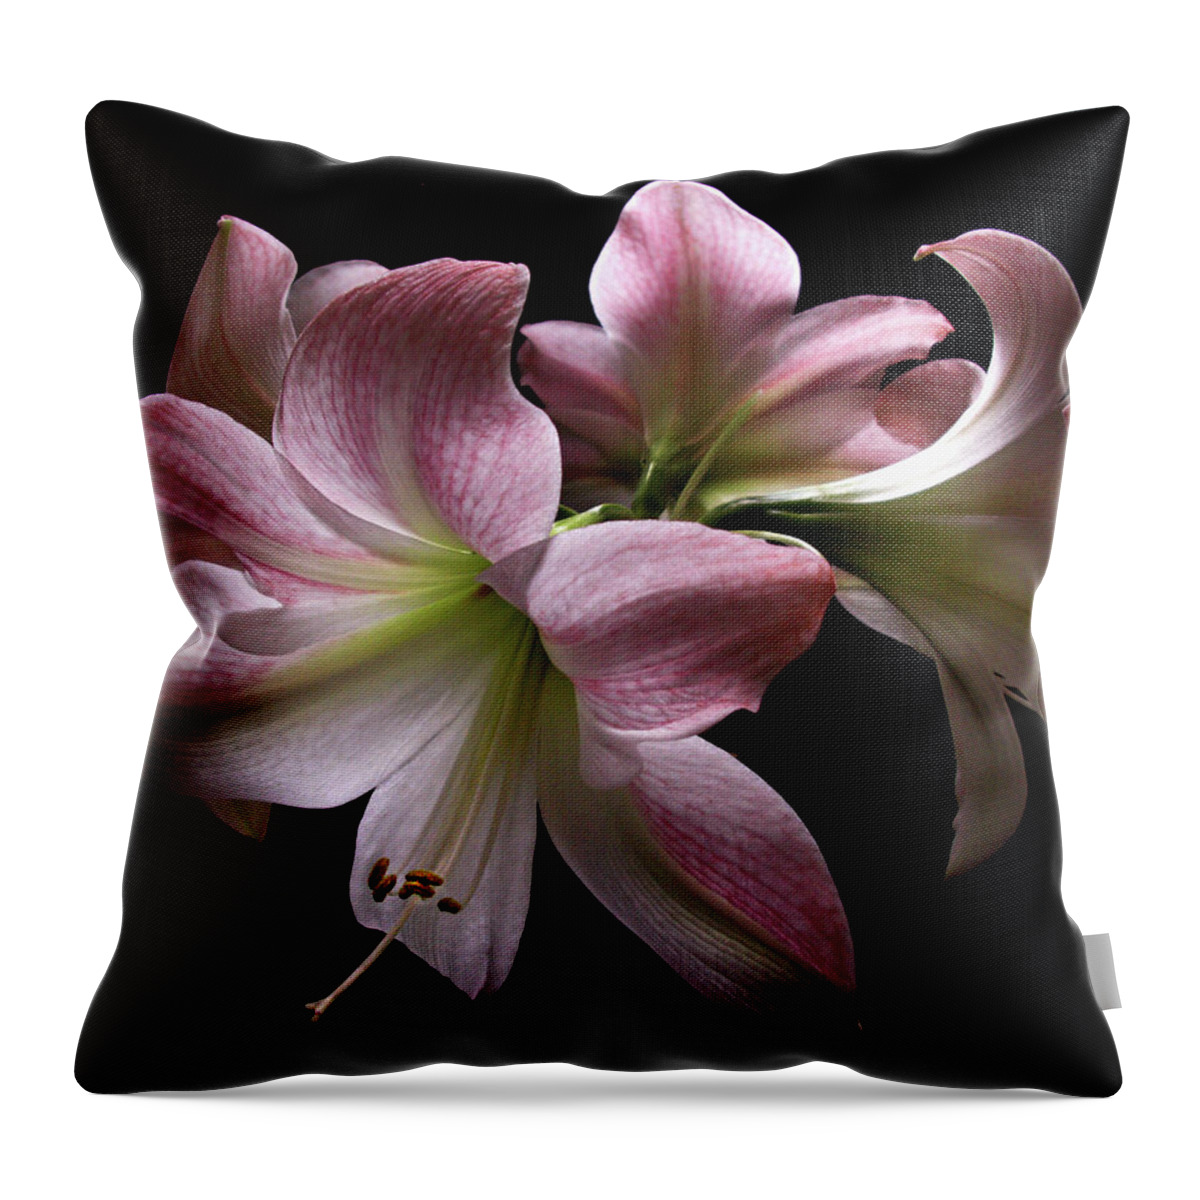 Holiday Throw Pillow featuring the photograph Four Pink Amaryllis Blooms by Nancy Griswold